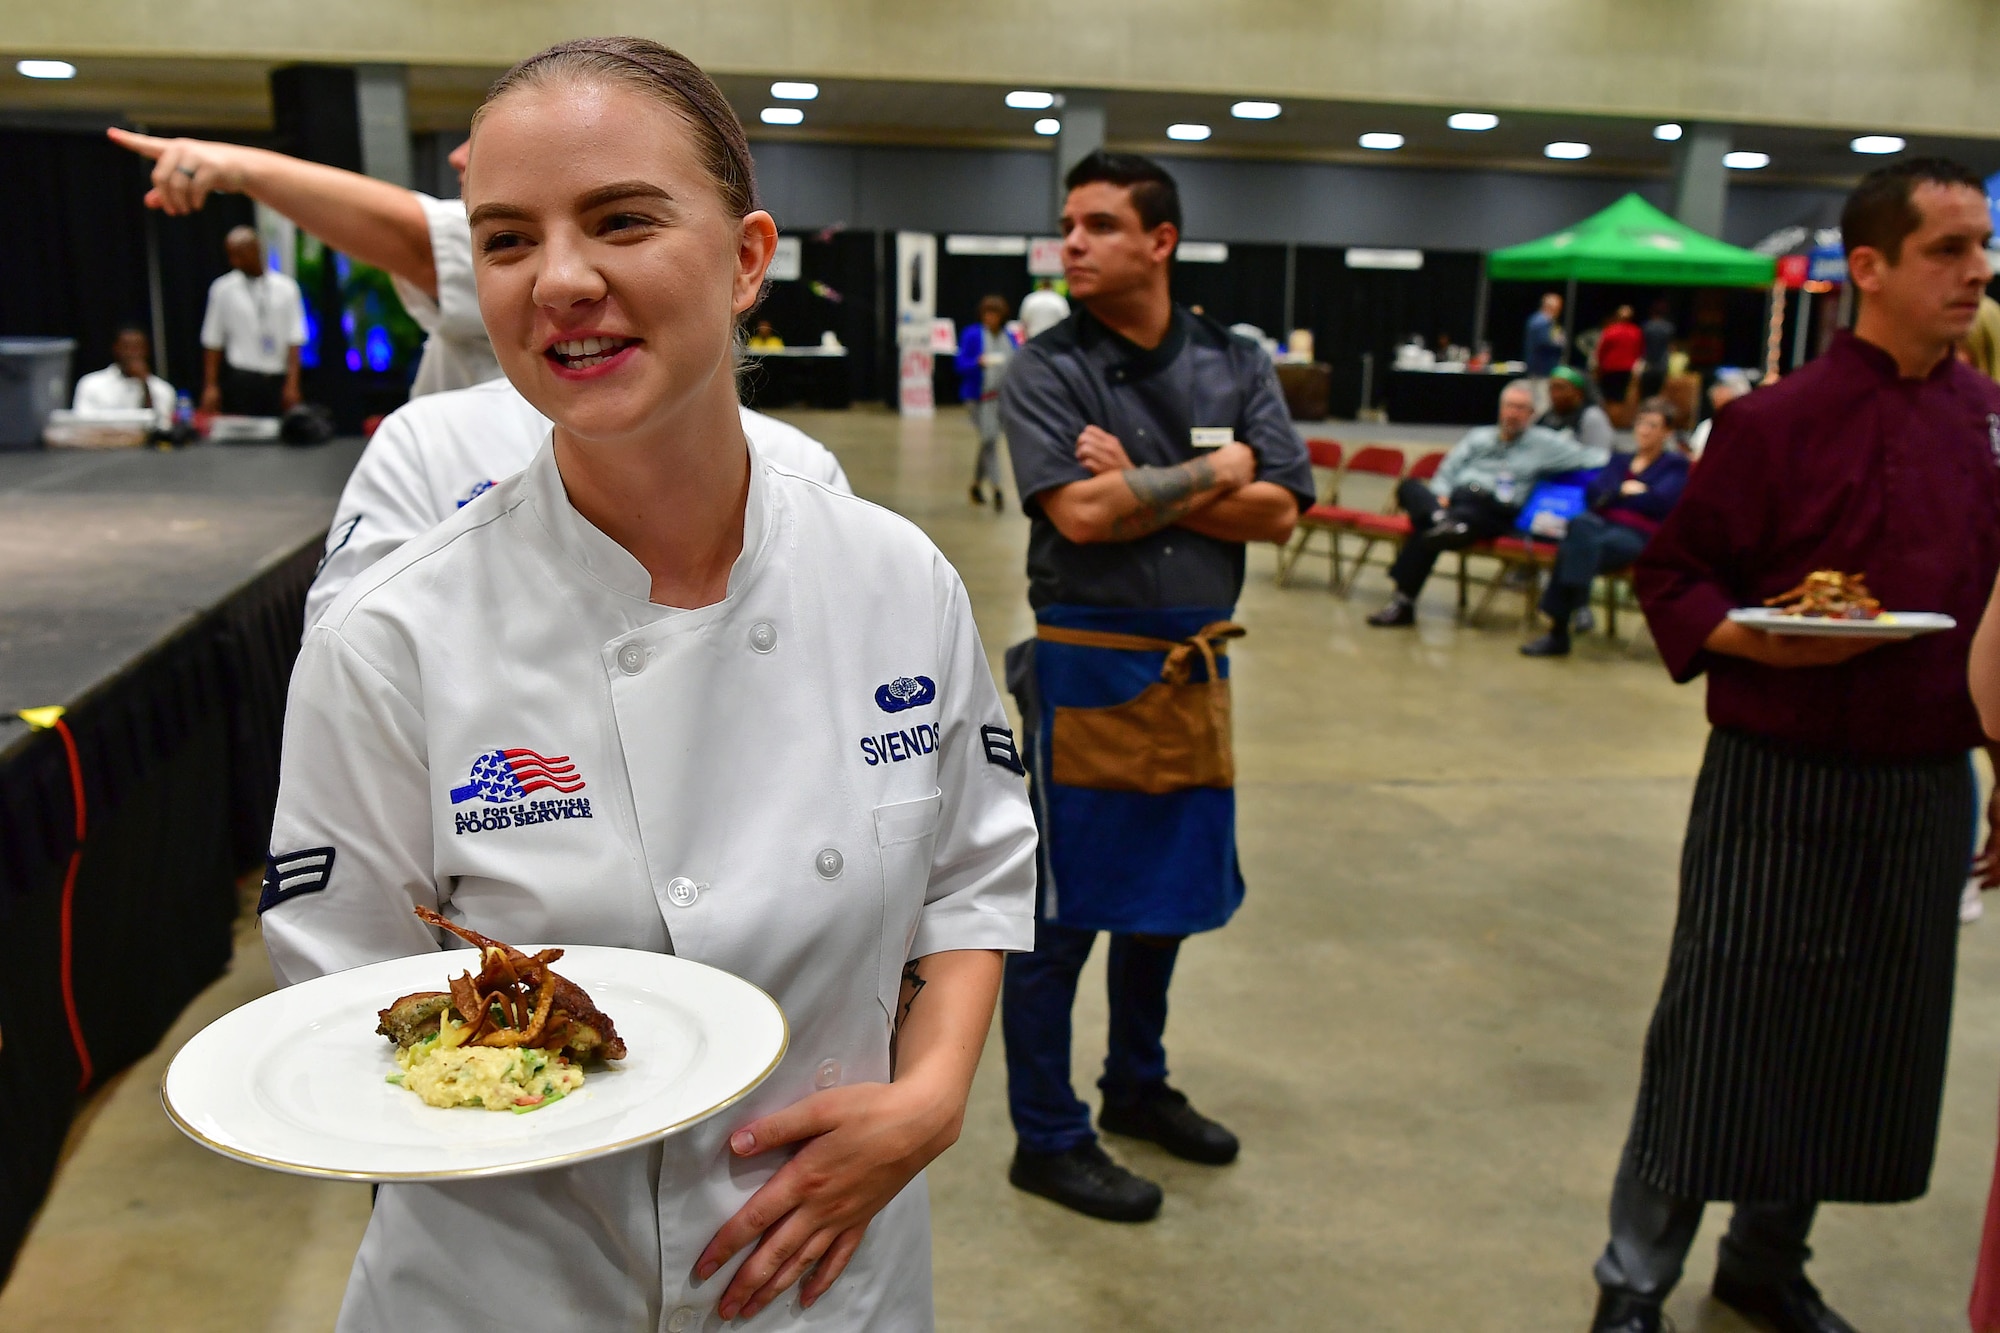 An Airman waits to hand her dish to the judges.